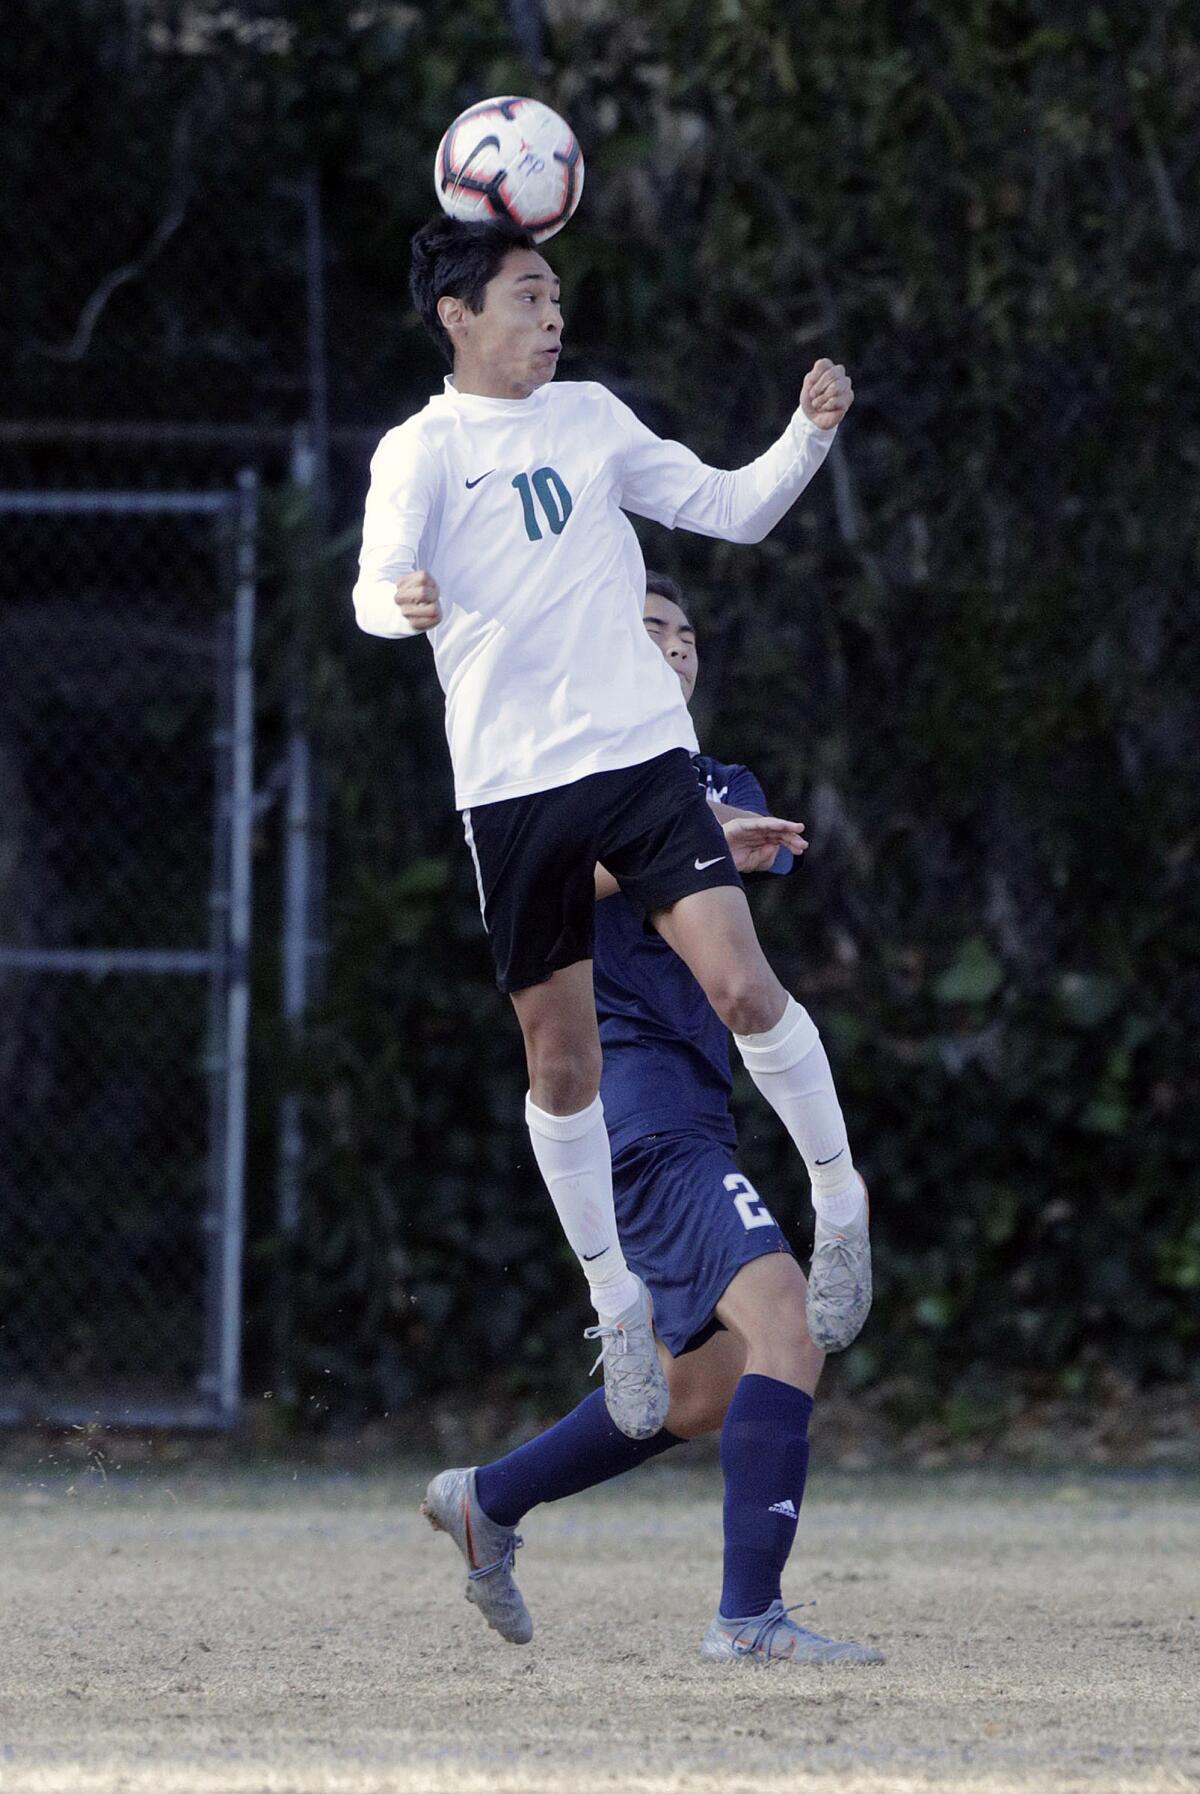 Providence's Bryan Ortiz heads the ball against Flintridge Prep in a Prep League boys' soccer game at Flintridge Preparatory School in La Canada Flintridge on Wednesday, January 29, 2020. Providence won the game 1-0 after scoring in the first half.